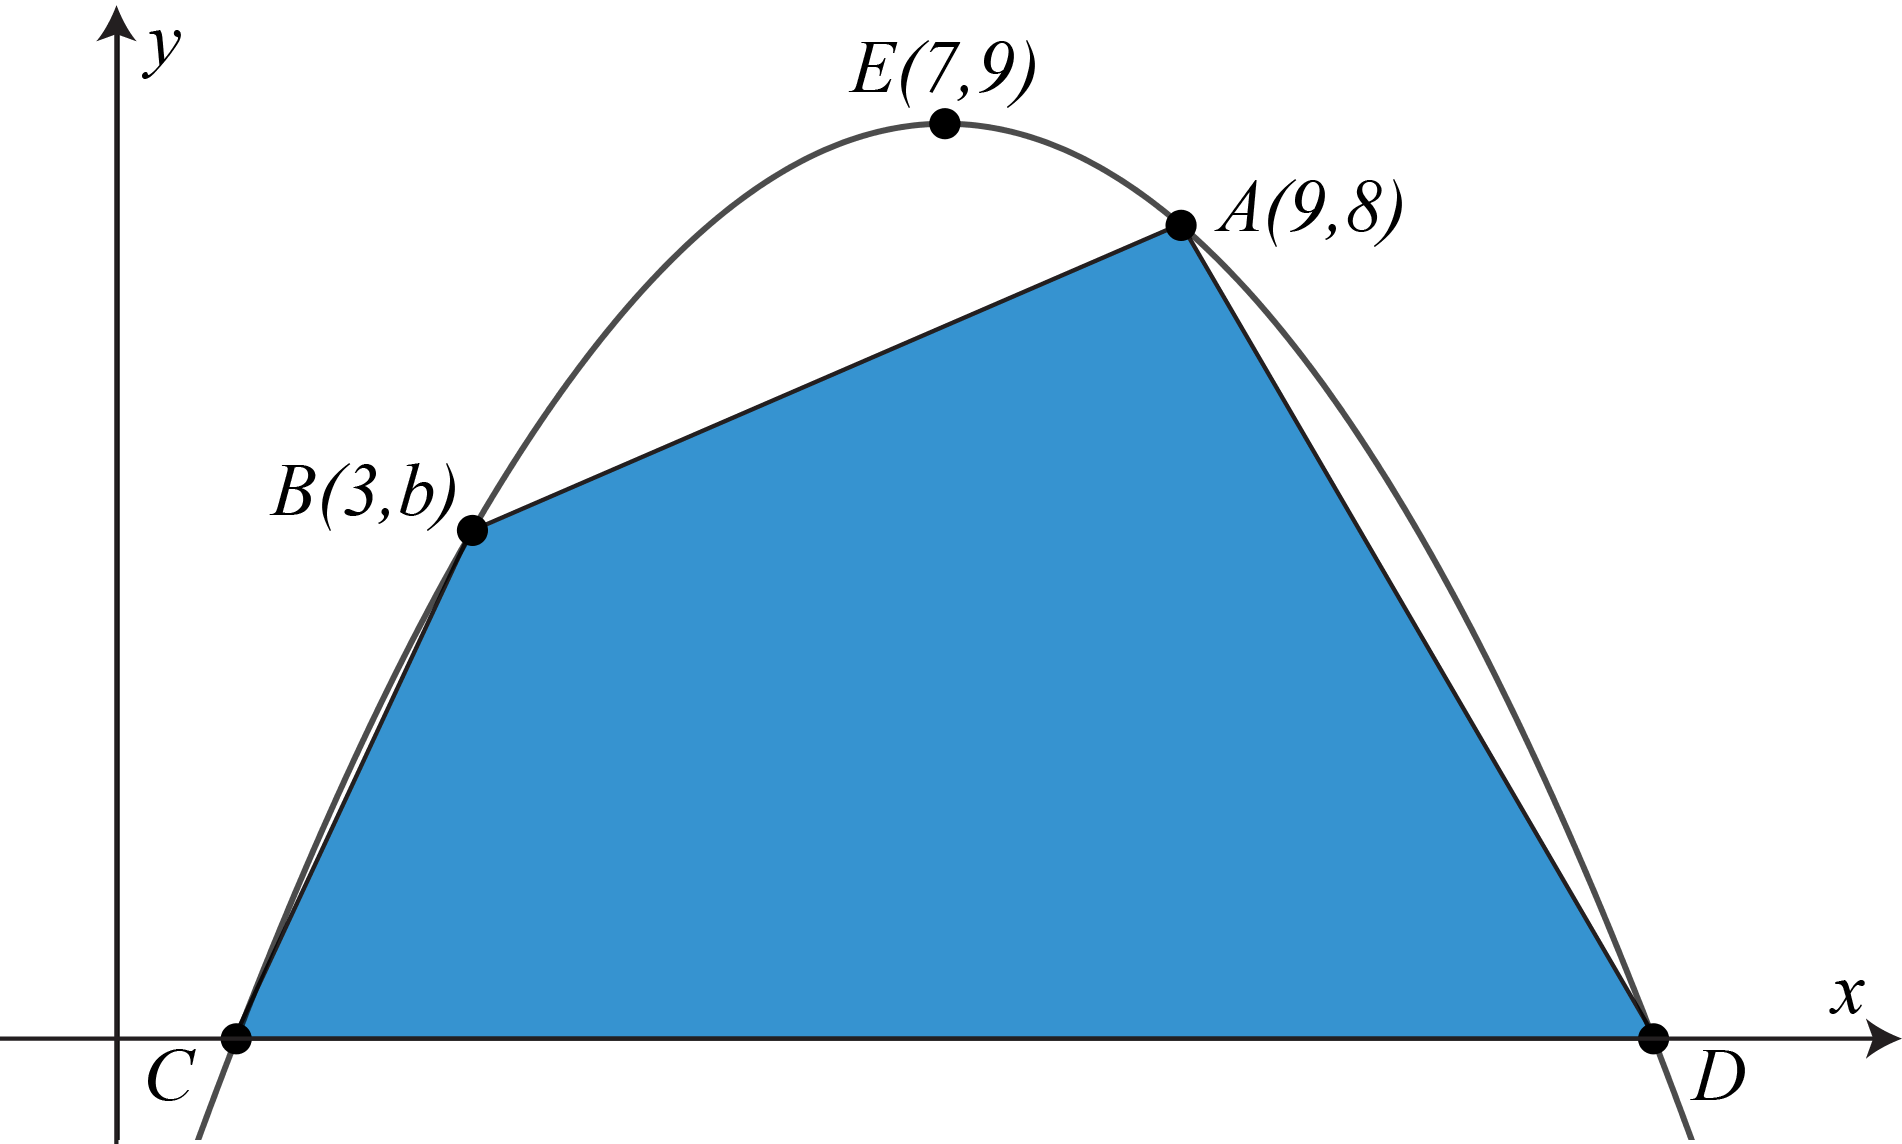 A region in the first quadrant of the Cartesian plane is bounded above by a downward opening parabola and below by line segment CD along the x-axis. Points B, E and A are plotted on the parabola from left to right. Quadrilateral ABCD is contained within the region.